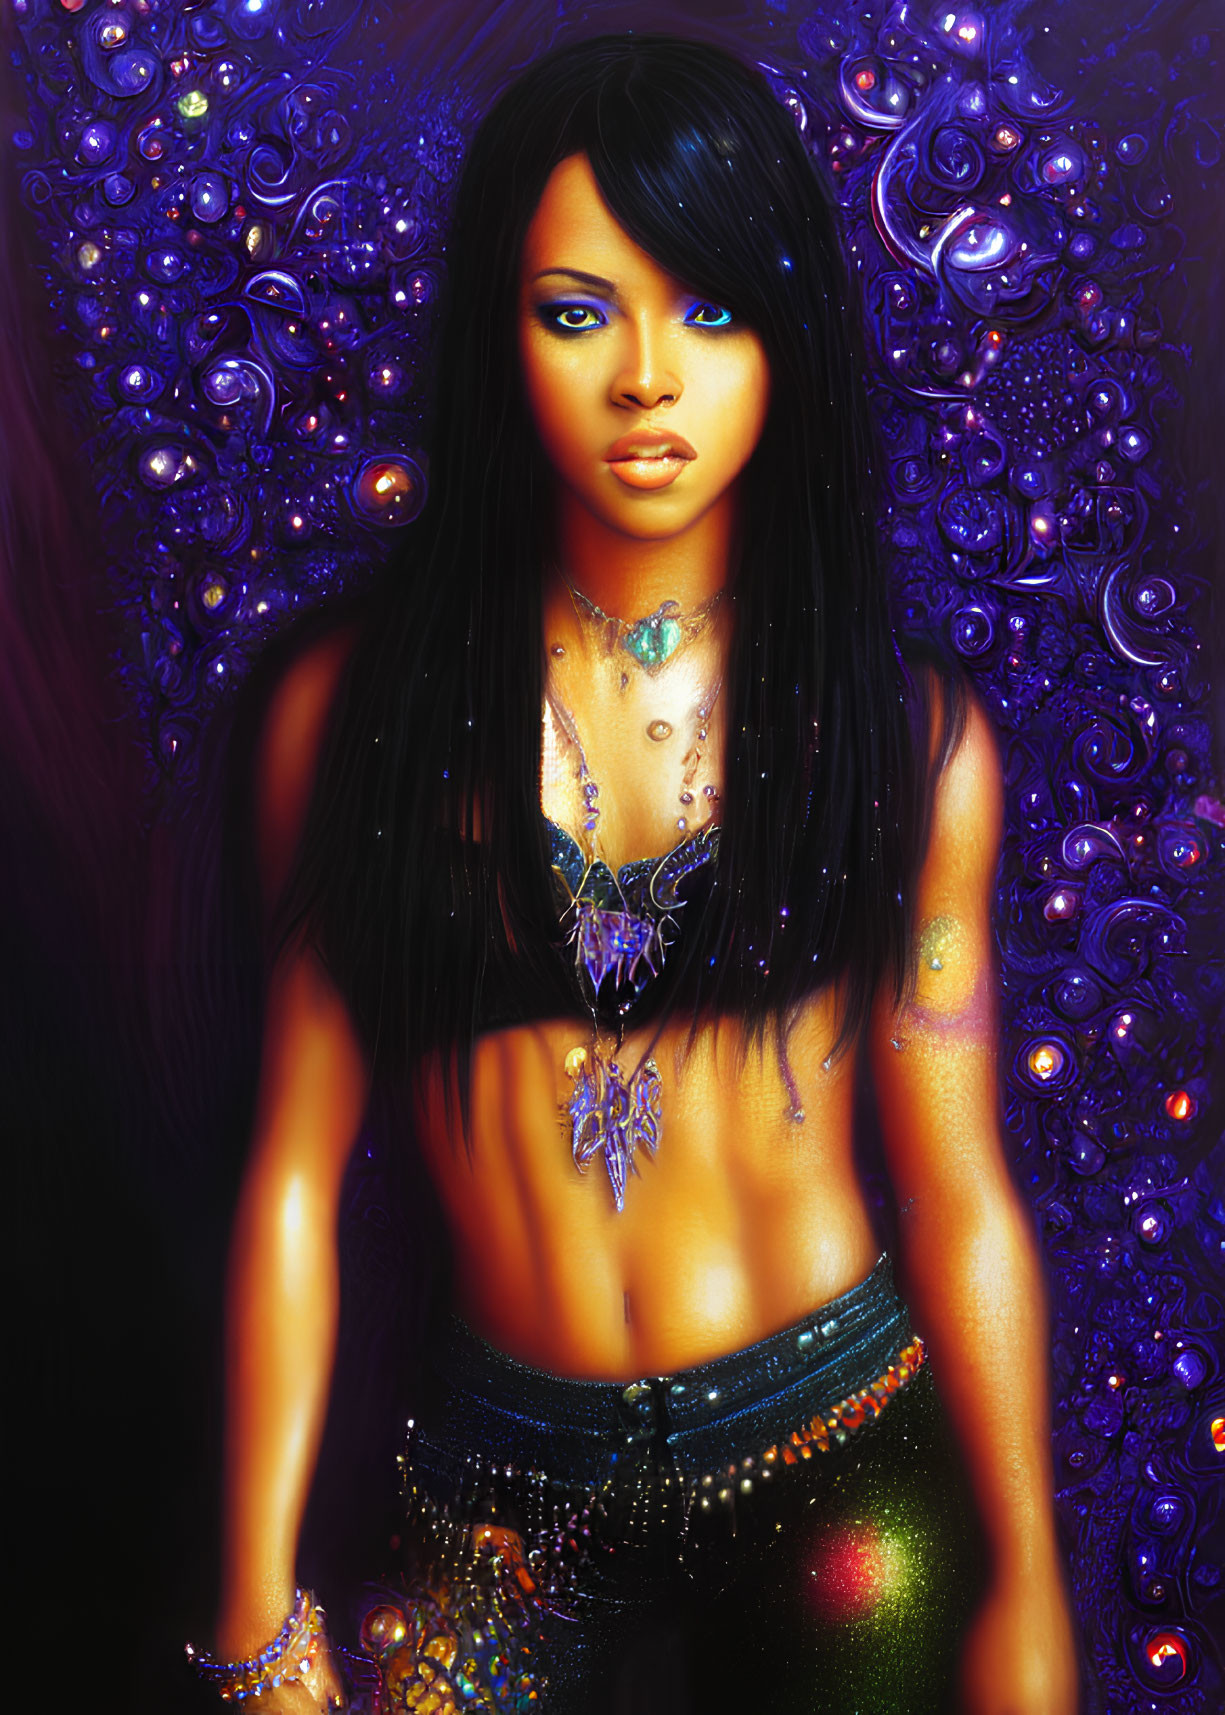 Woman's digital portrait with blue eyes and intricate jewelry on swirling purple backdrop.